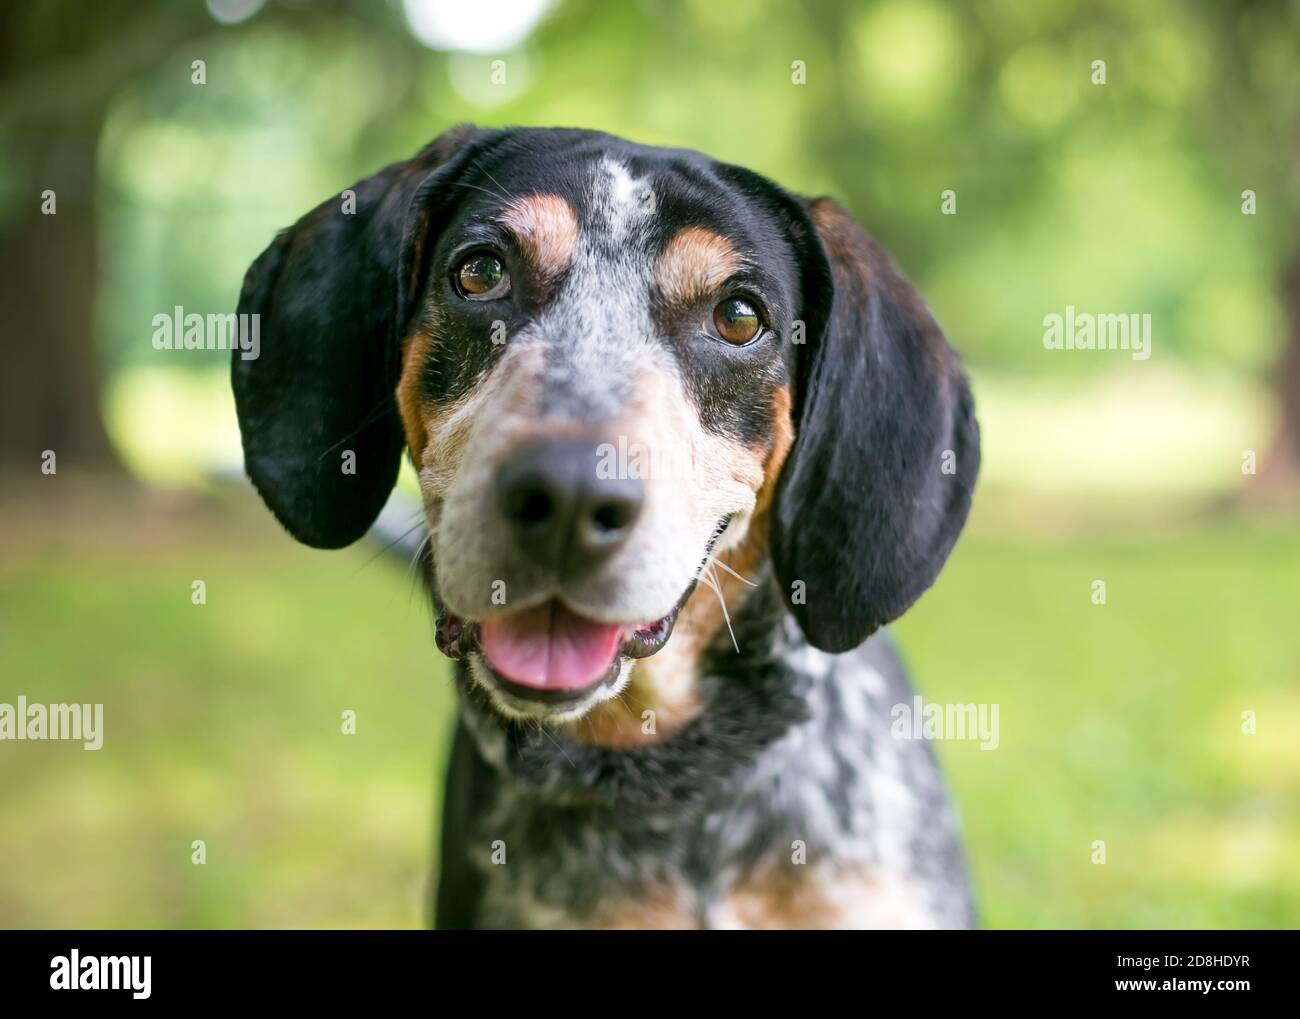 A Bluetick Coonhound dog with a happy expression and listening with a head tilt Stock Photo